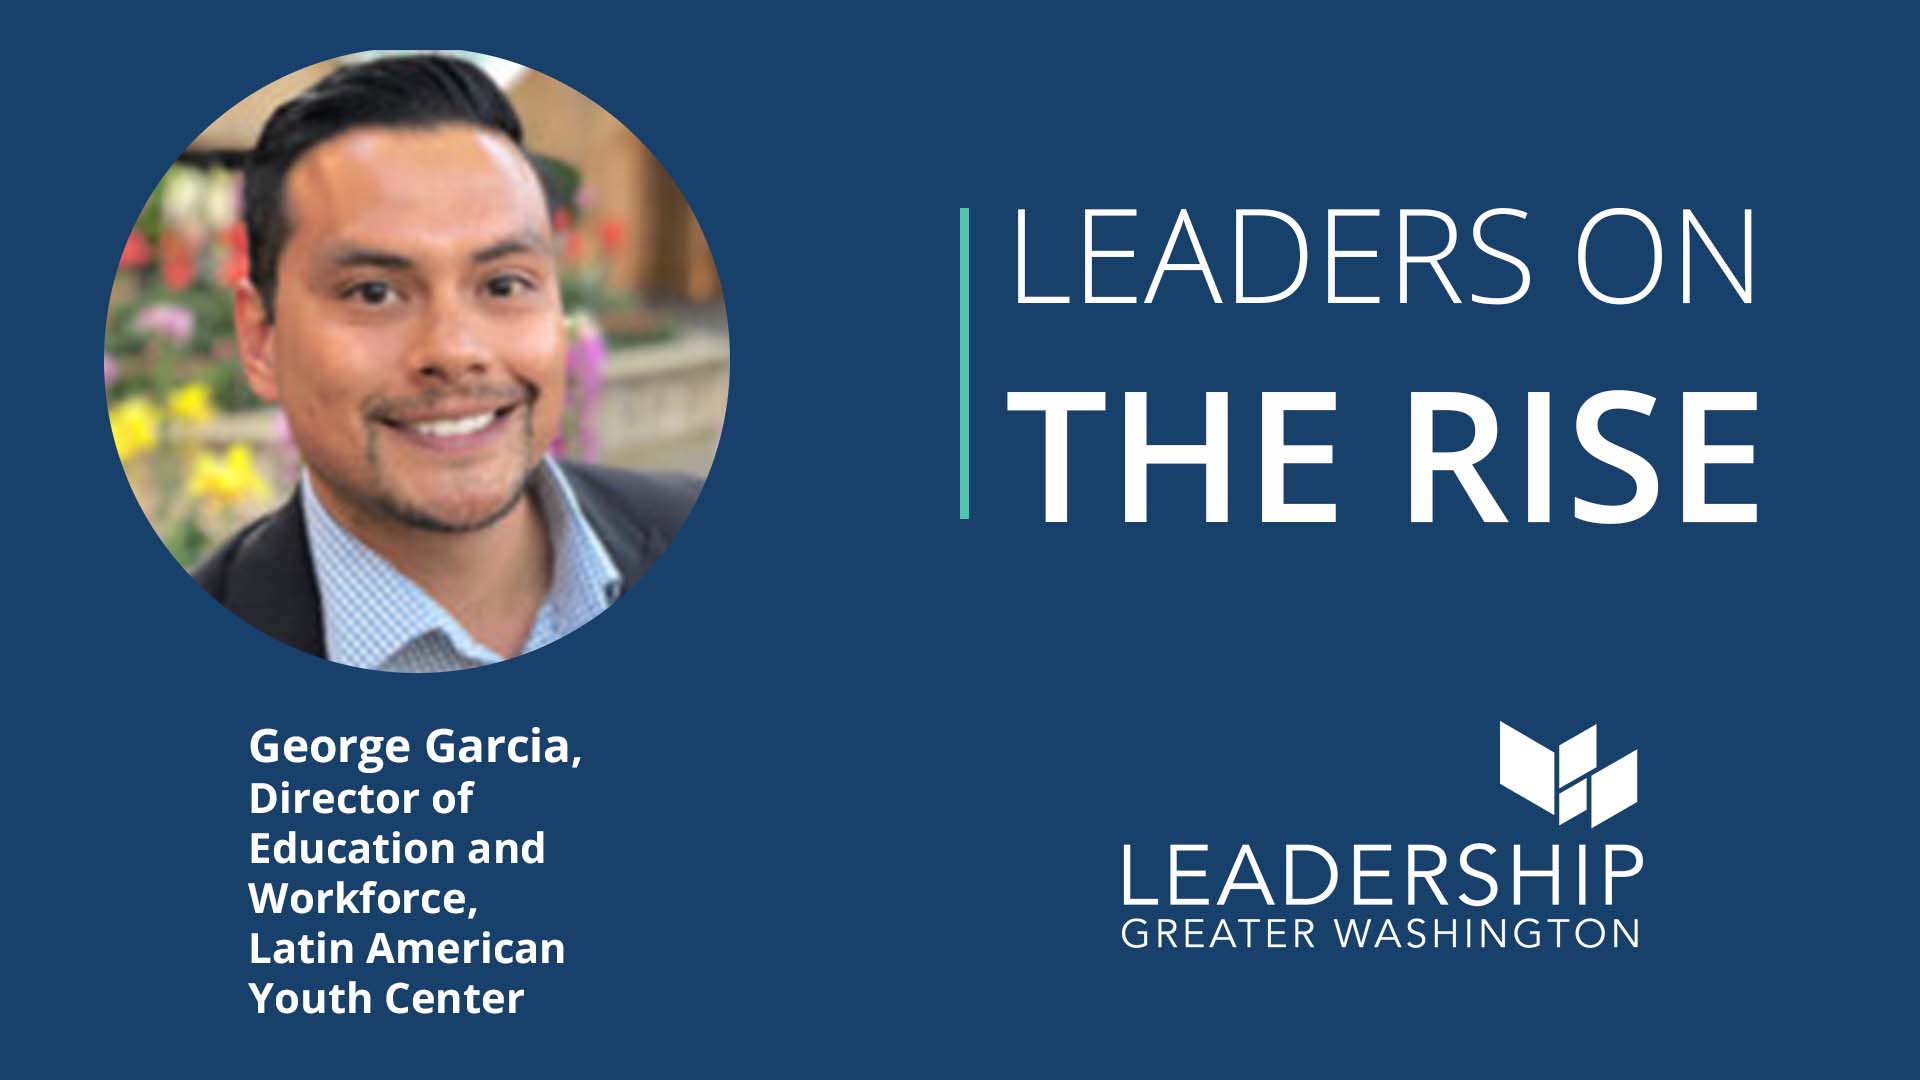 Leaders on the Rise - George Garcia, Latin American Youth Center